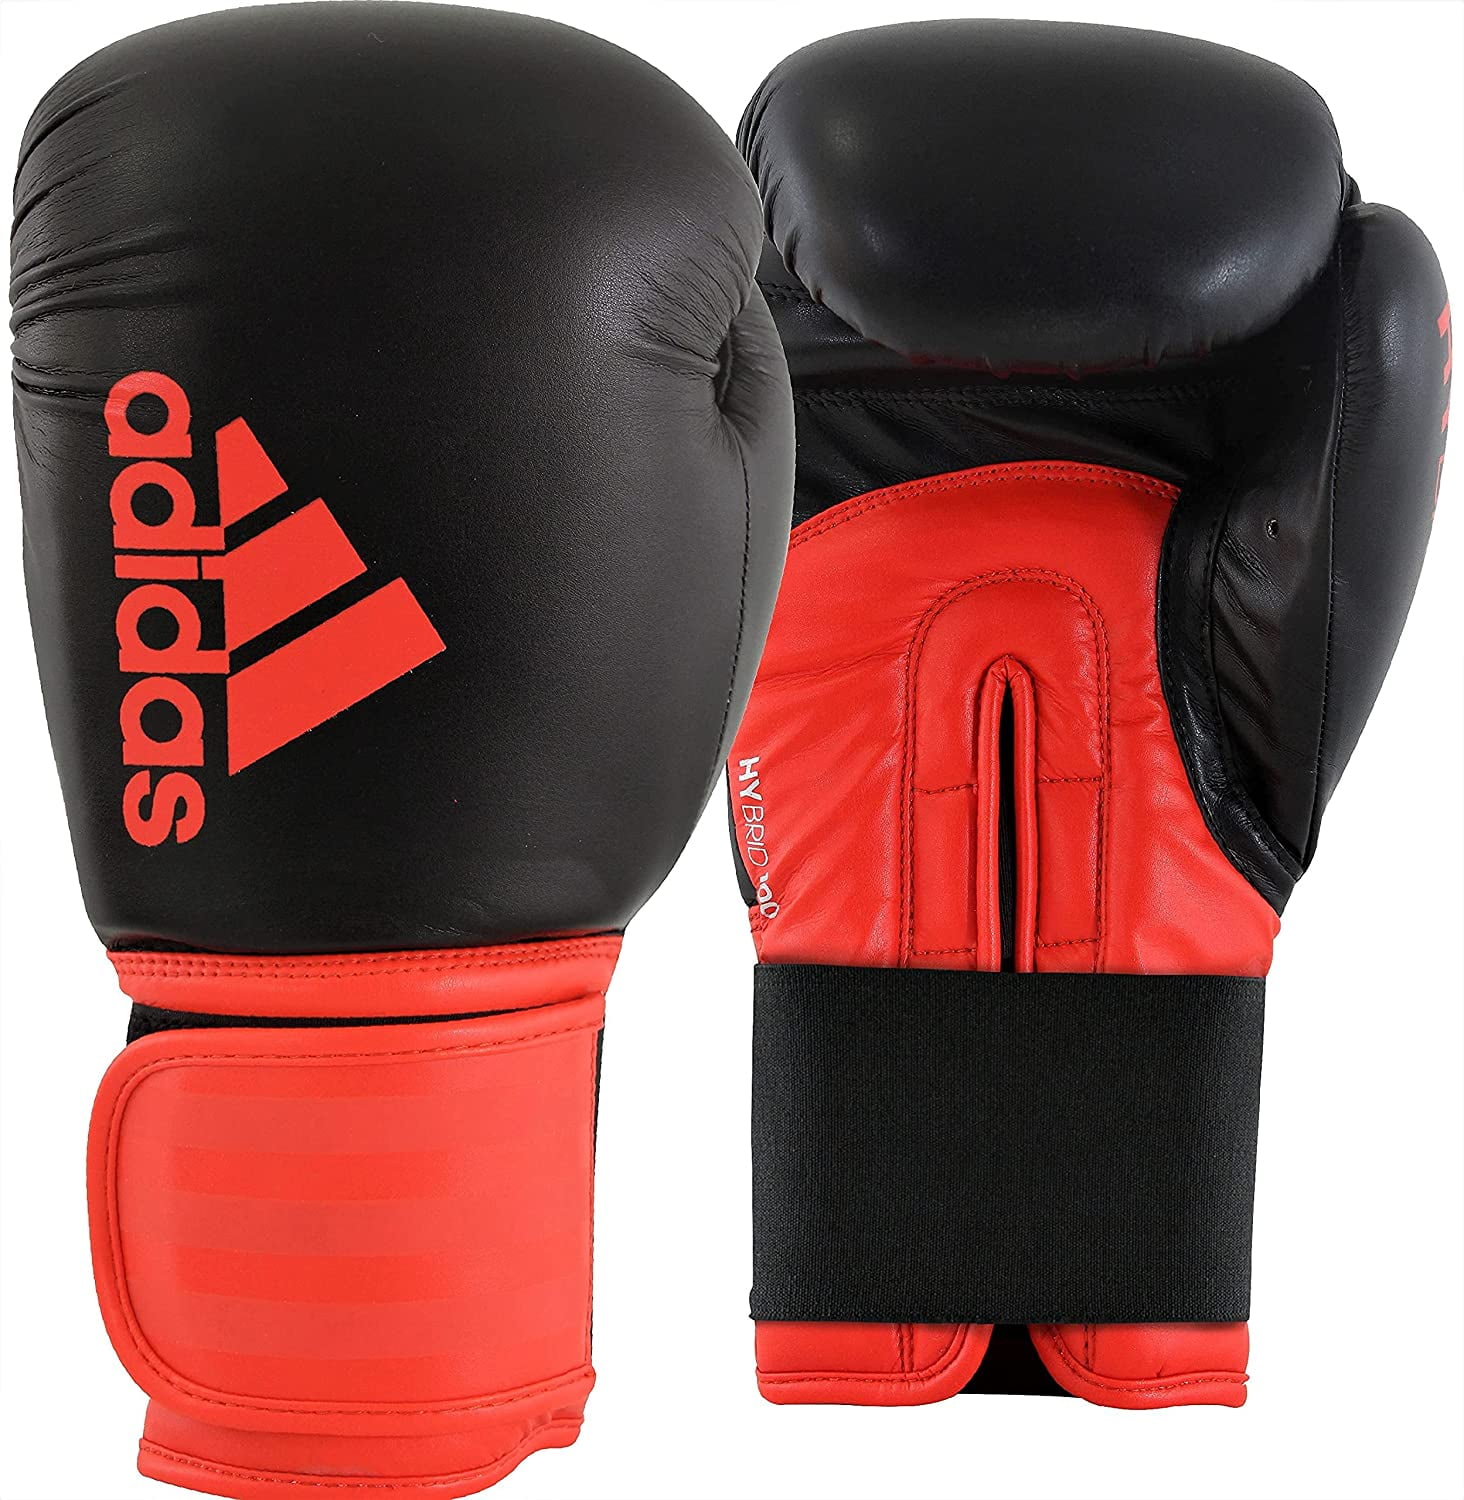 Adidas Boxing and Kickboxing Gloves Women - and - for Black/White, - 16oz Punching, Bags 100 - for Fitness Heavy Men Hybrid and